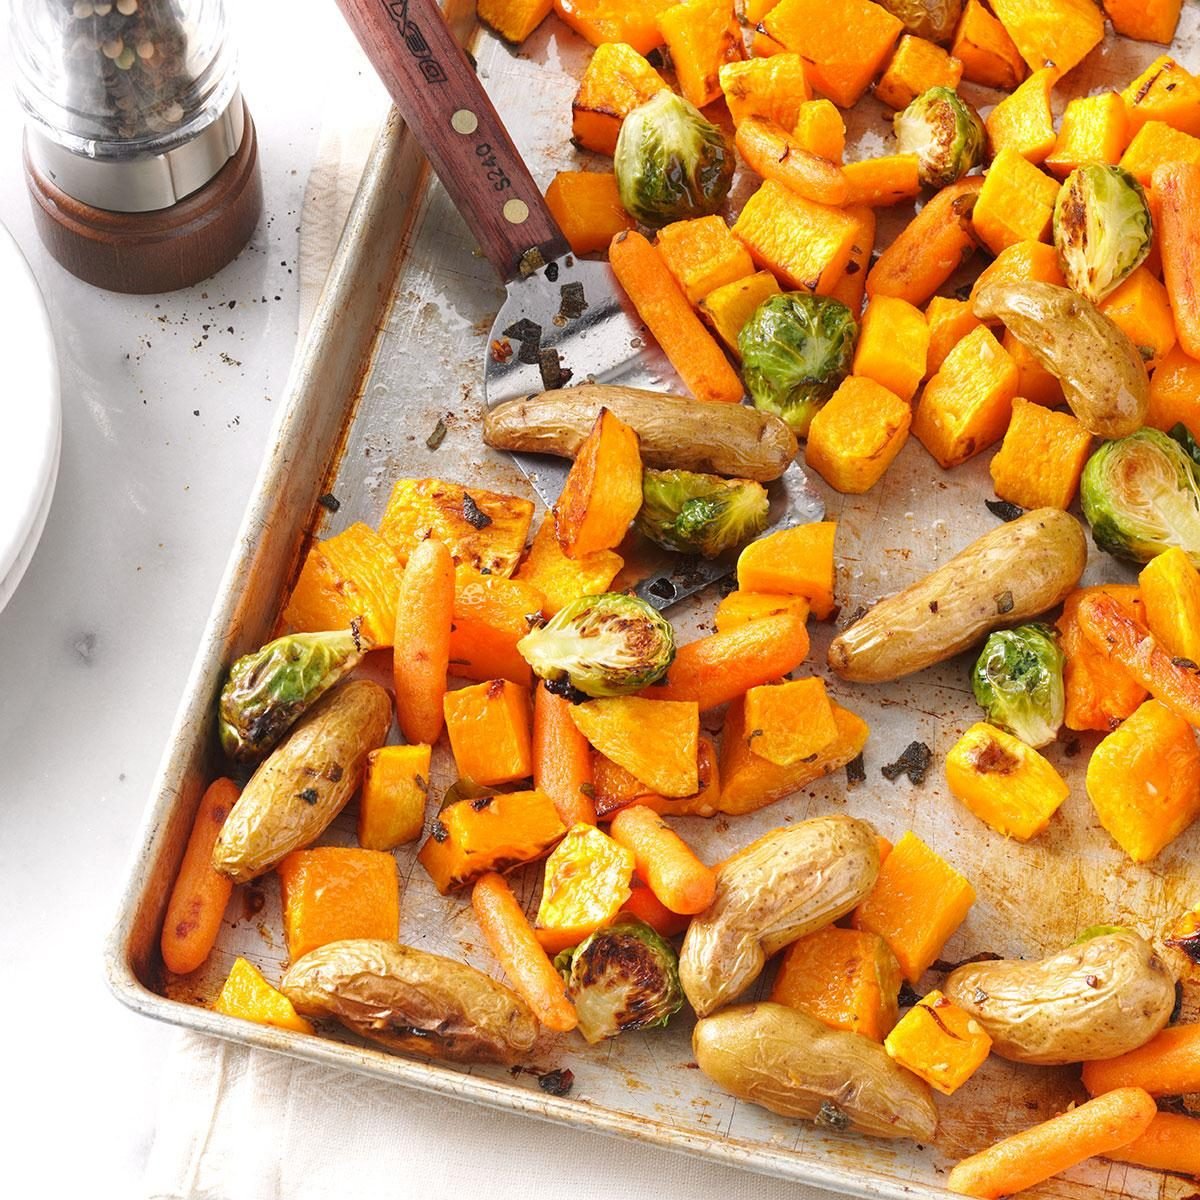 How to Roast Vegetables in the Oven — Roasted Vegetables Recipe